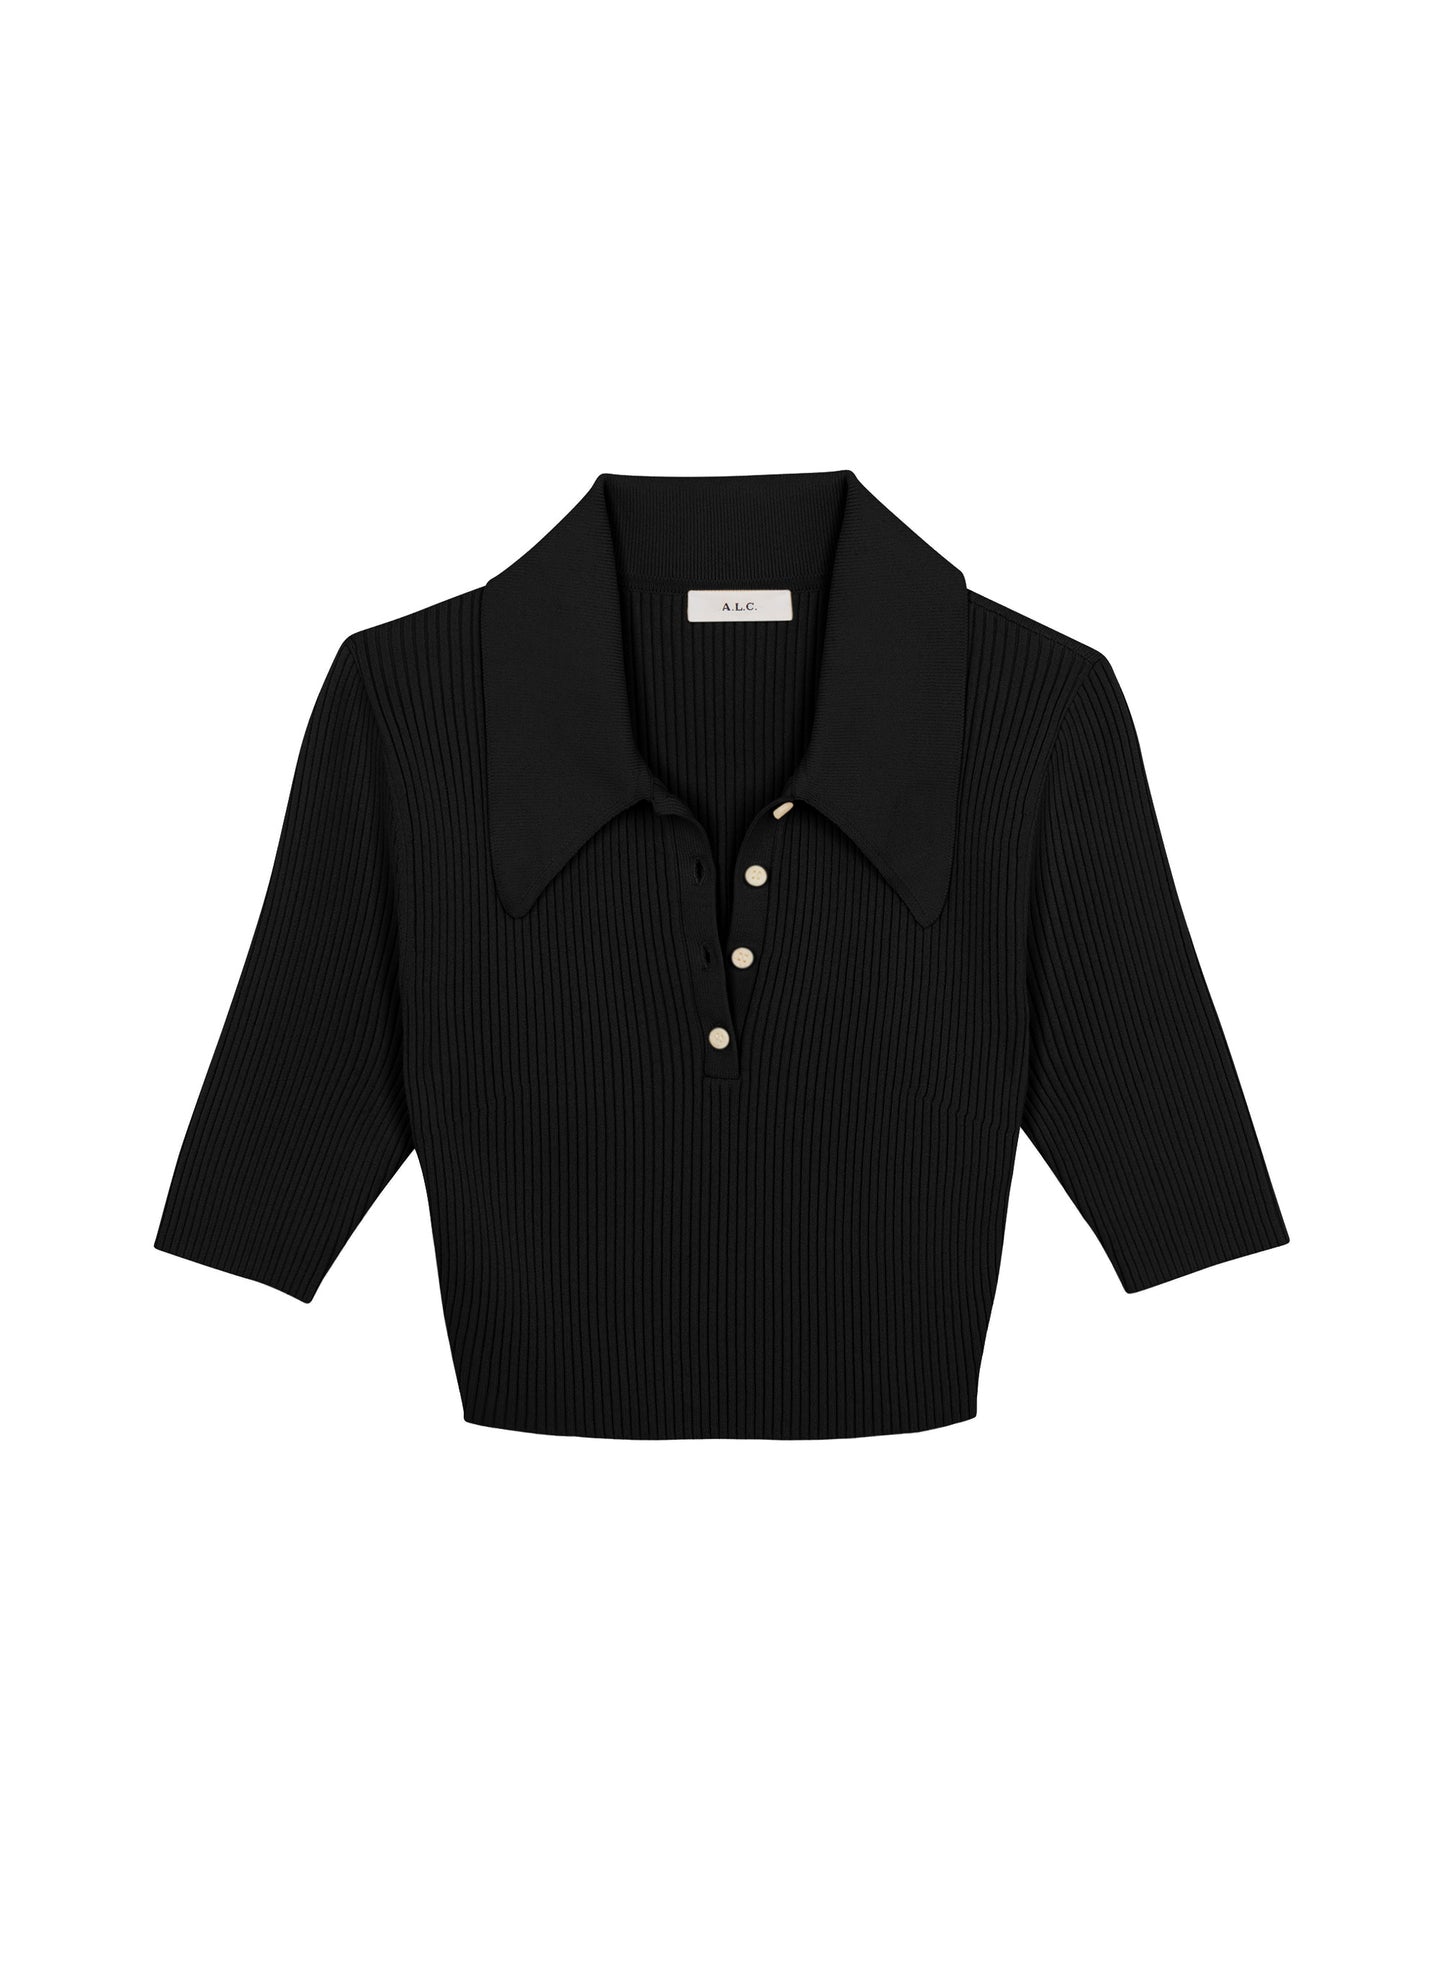 flatlay of black cropped collared knit shirt